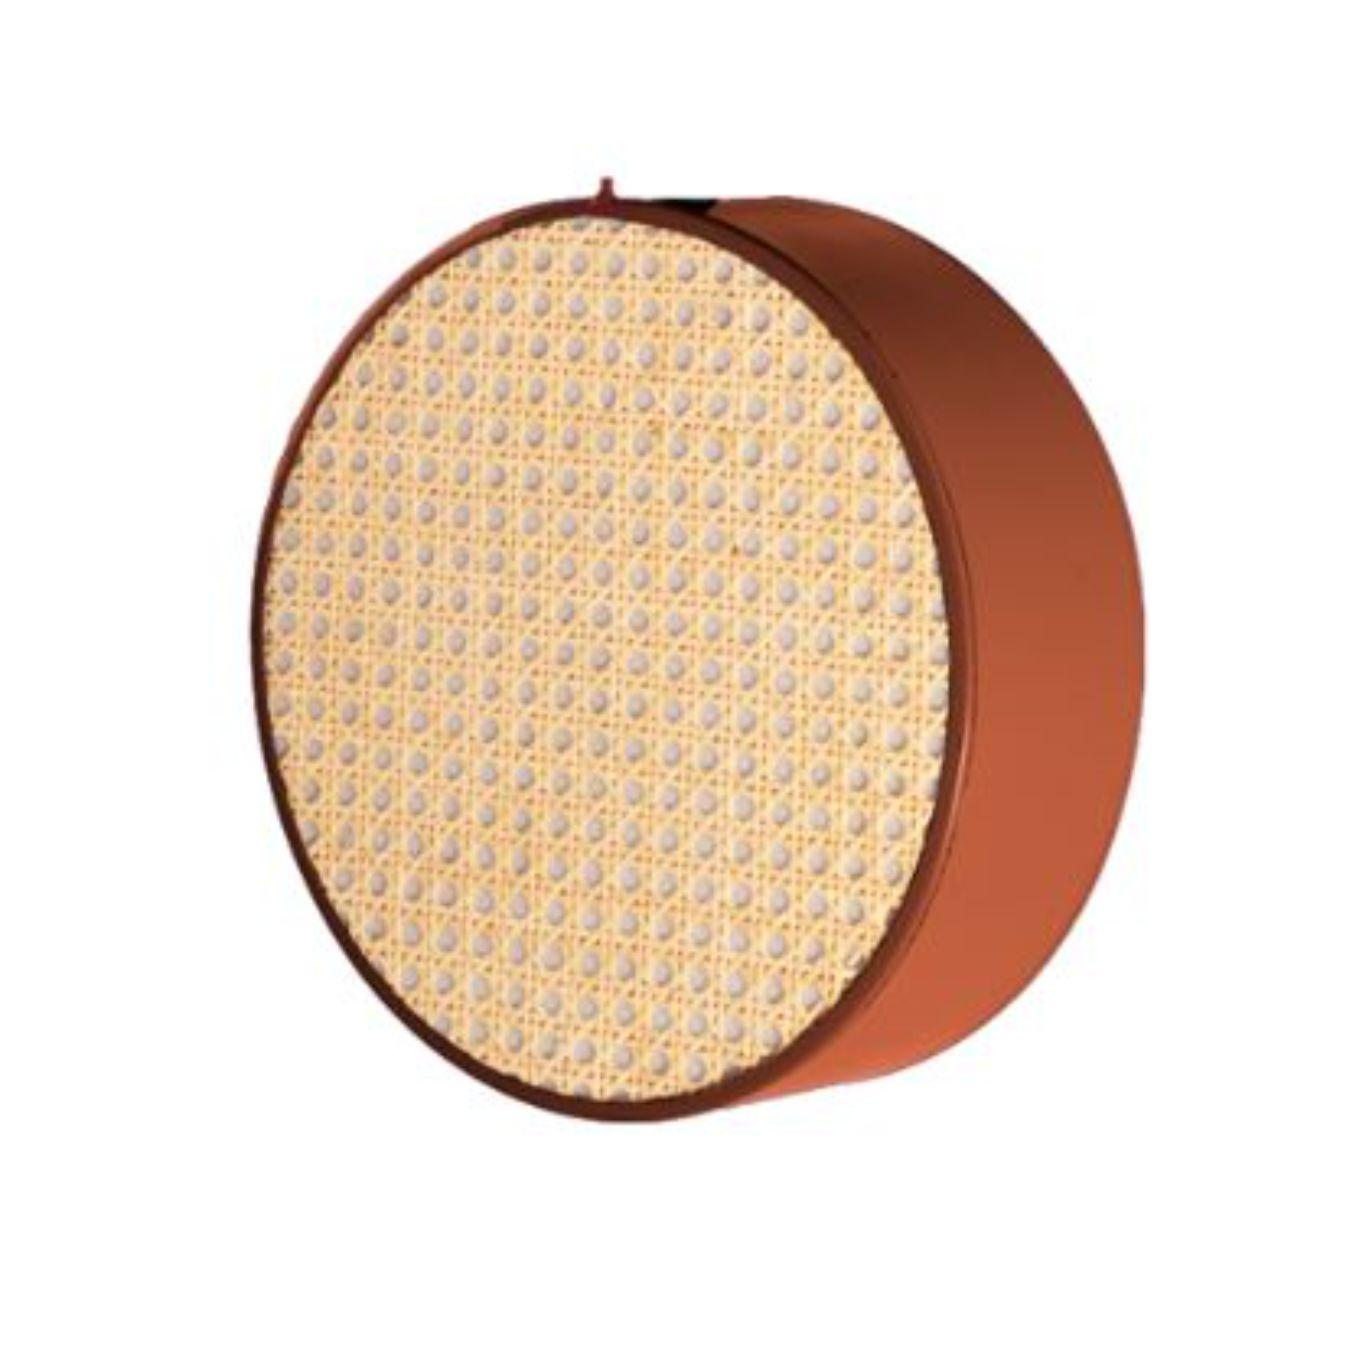 55 Monaco wall I lamp by Dooq
Dimensions: W 55 x D 55 x H 9 cm
Materials: lacquered metal, rattan, terrazzo.
Also available in different dimensions. 

Information:
230V/50Hz
2 x max. G9
4W LED

120V/60Hz
2 x max. G9
4W LED

Cable: